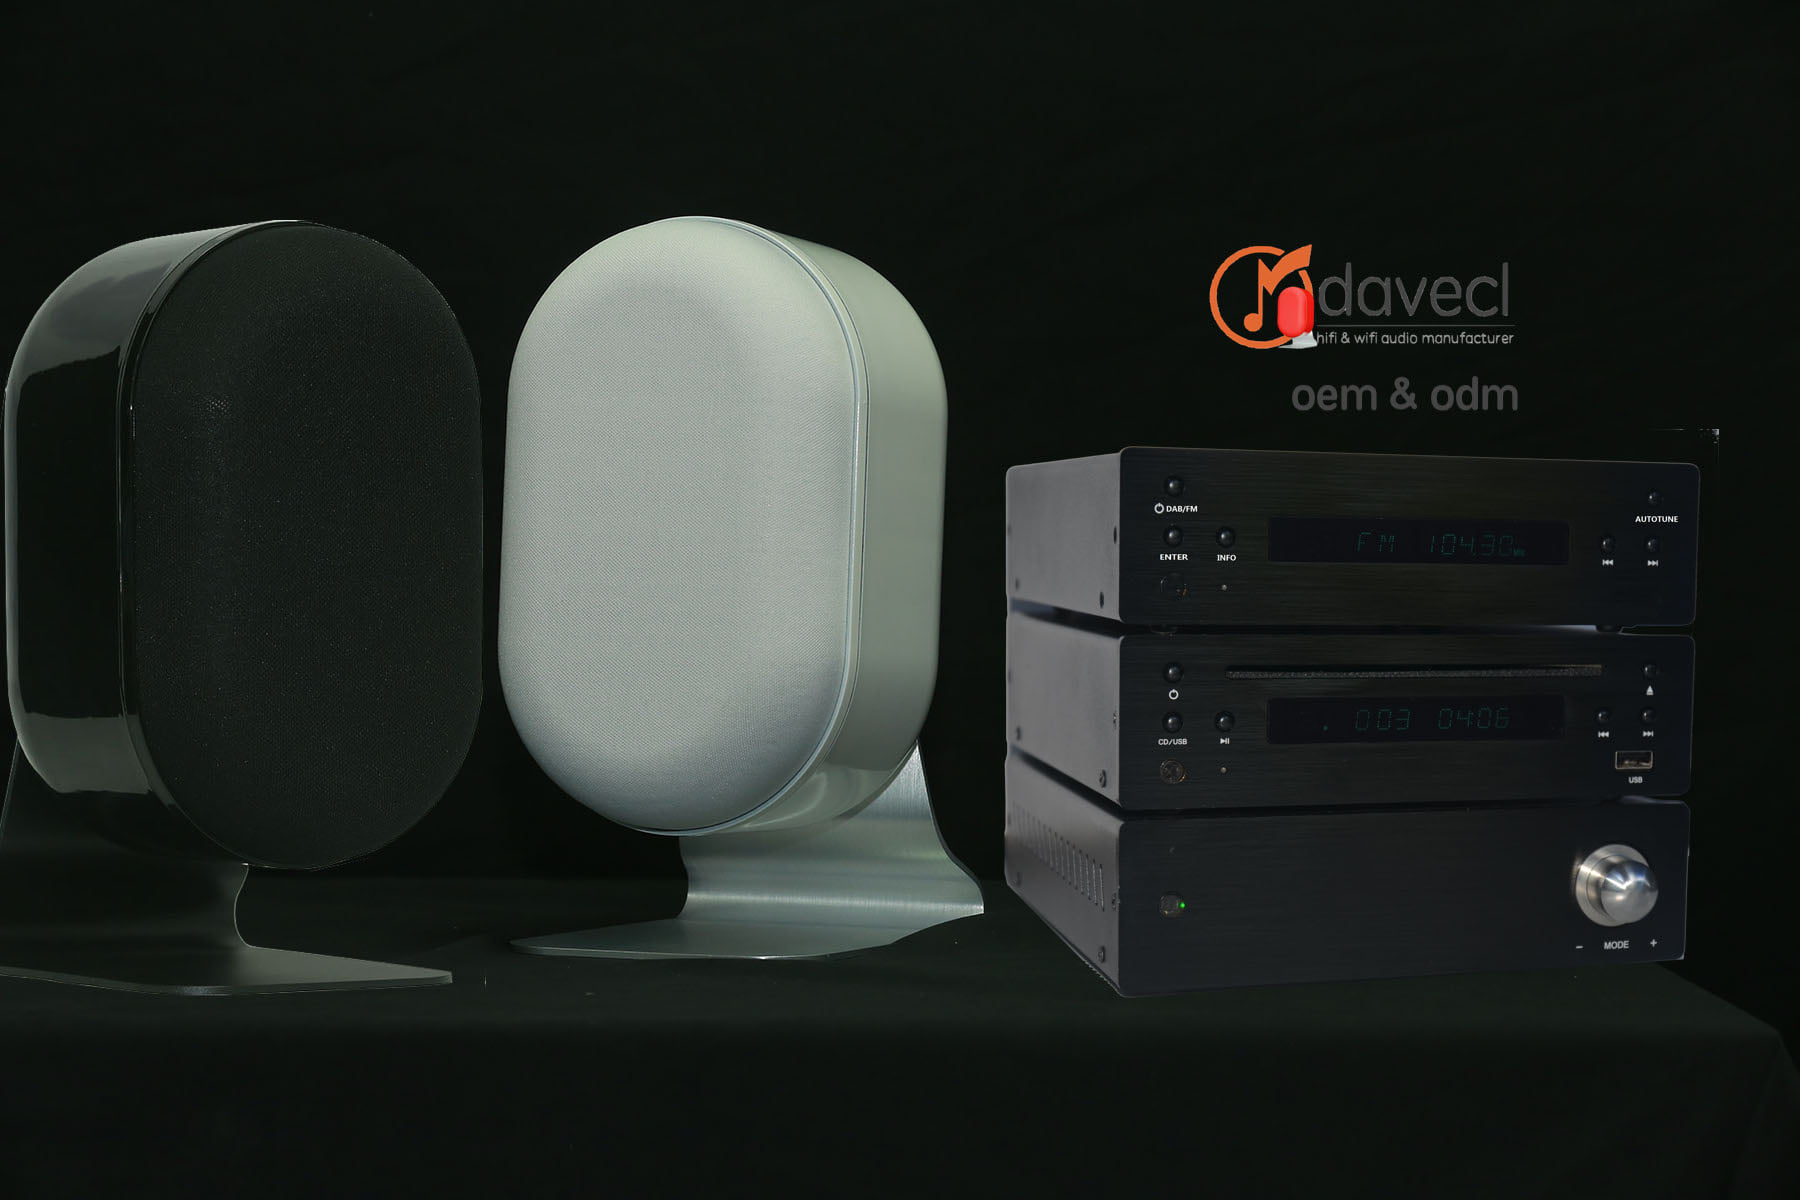 How much do you know about the selection criteria for home theater audio?